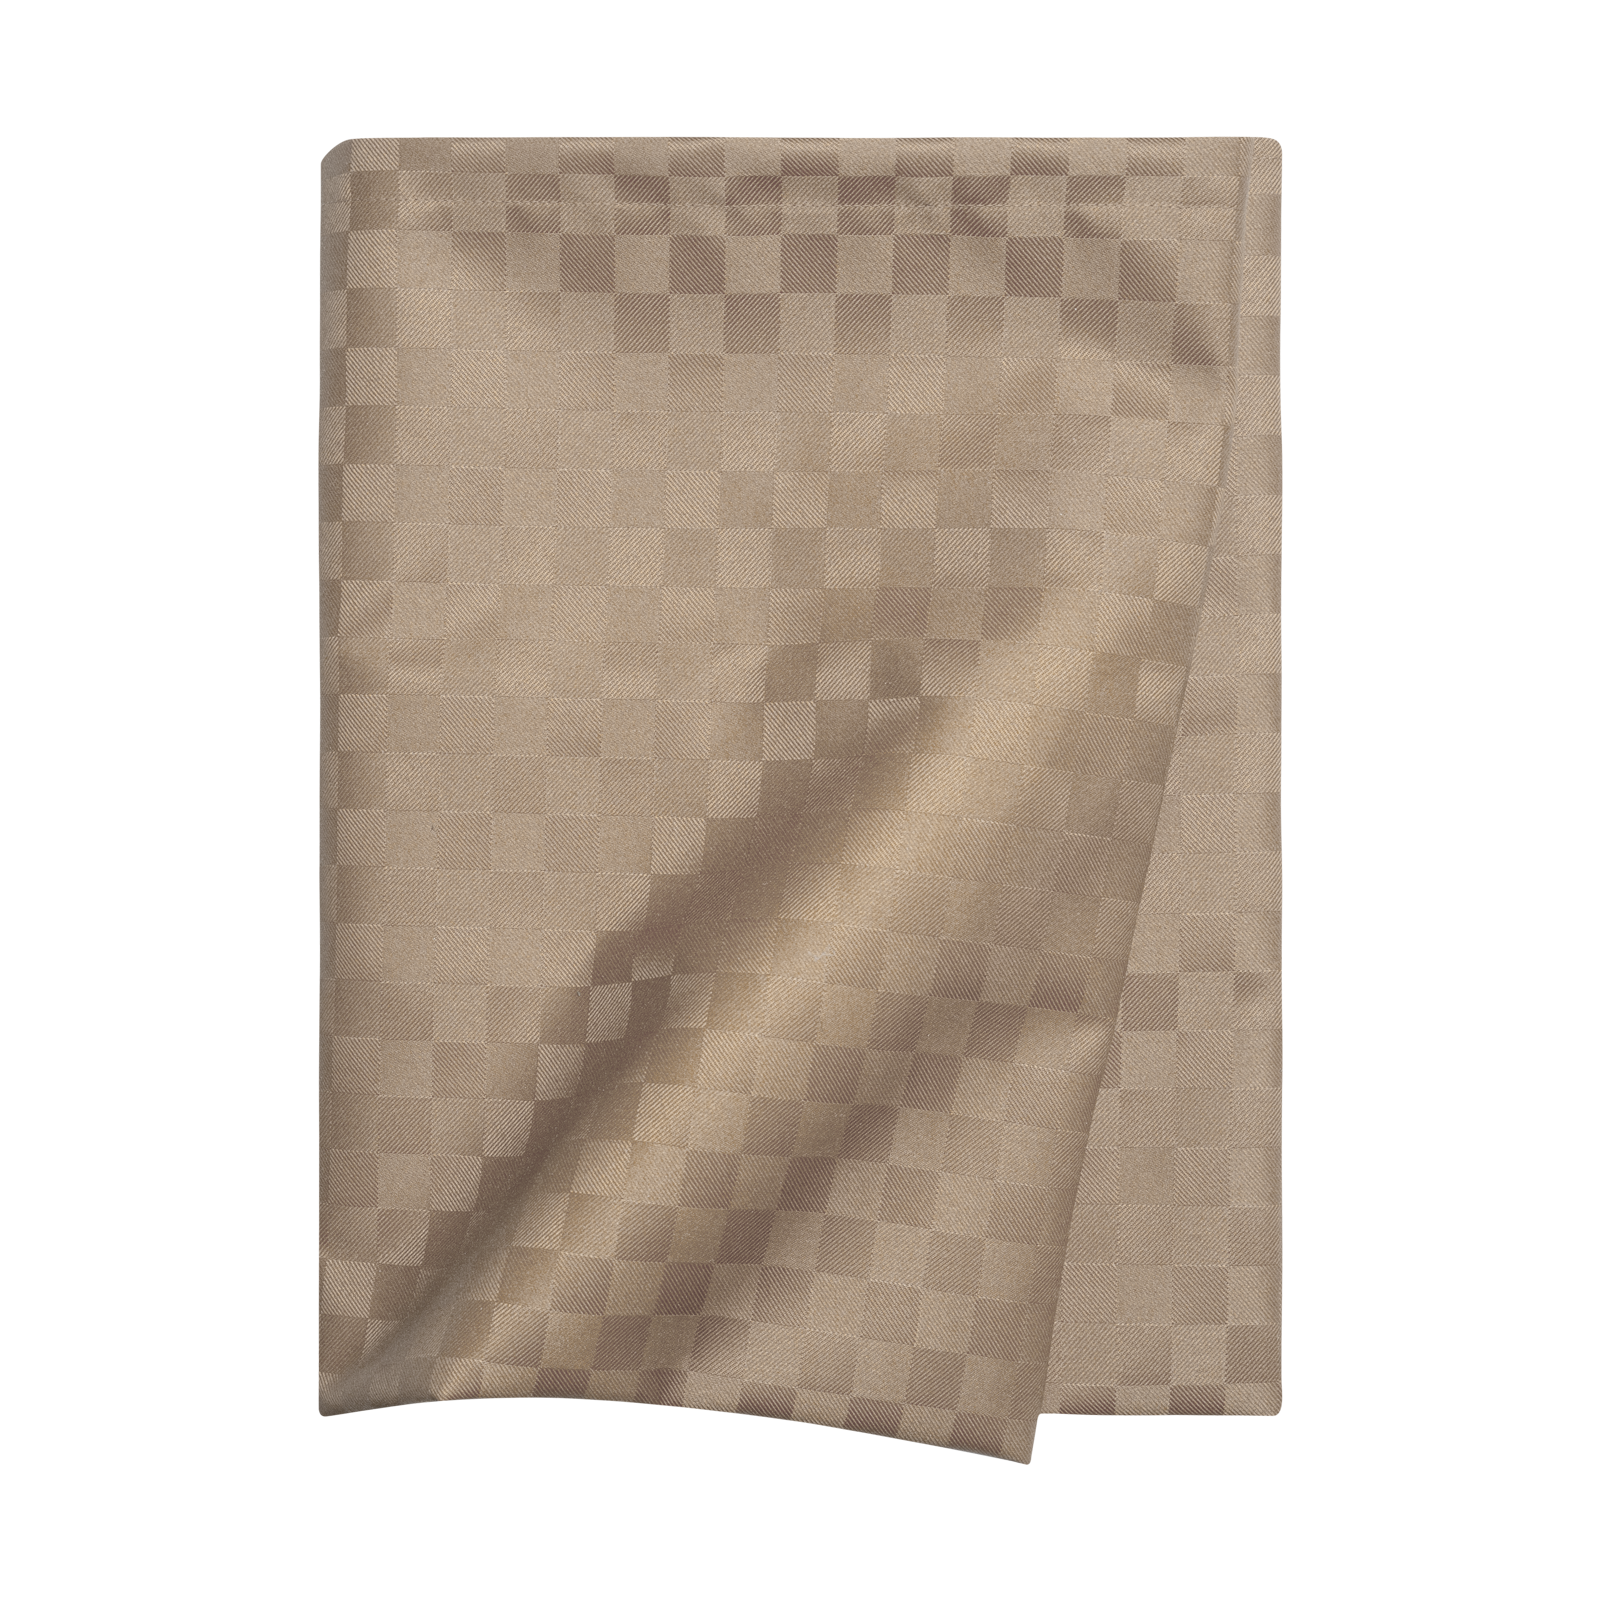 Größe: 80x 80 cm Farbe: taupe #farbe_taupe